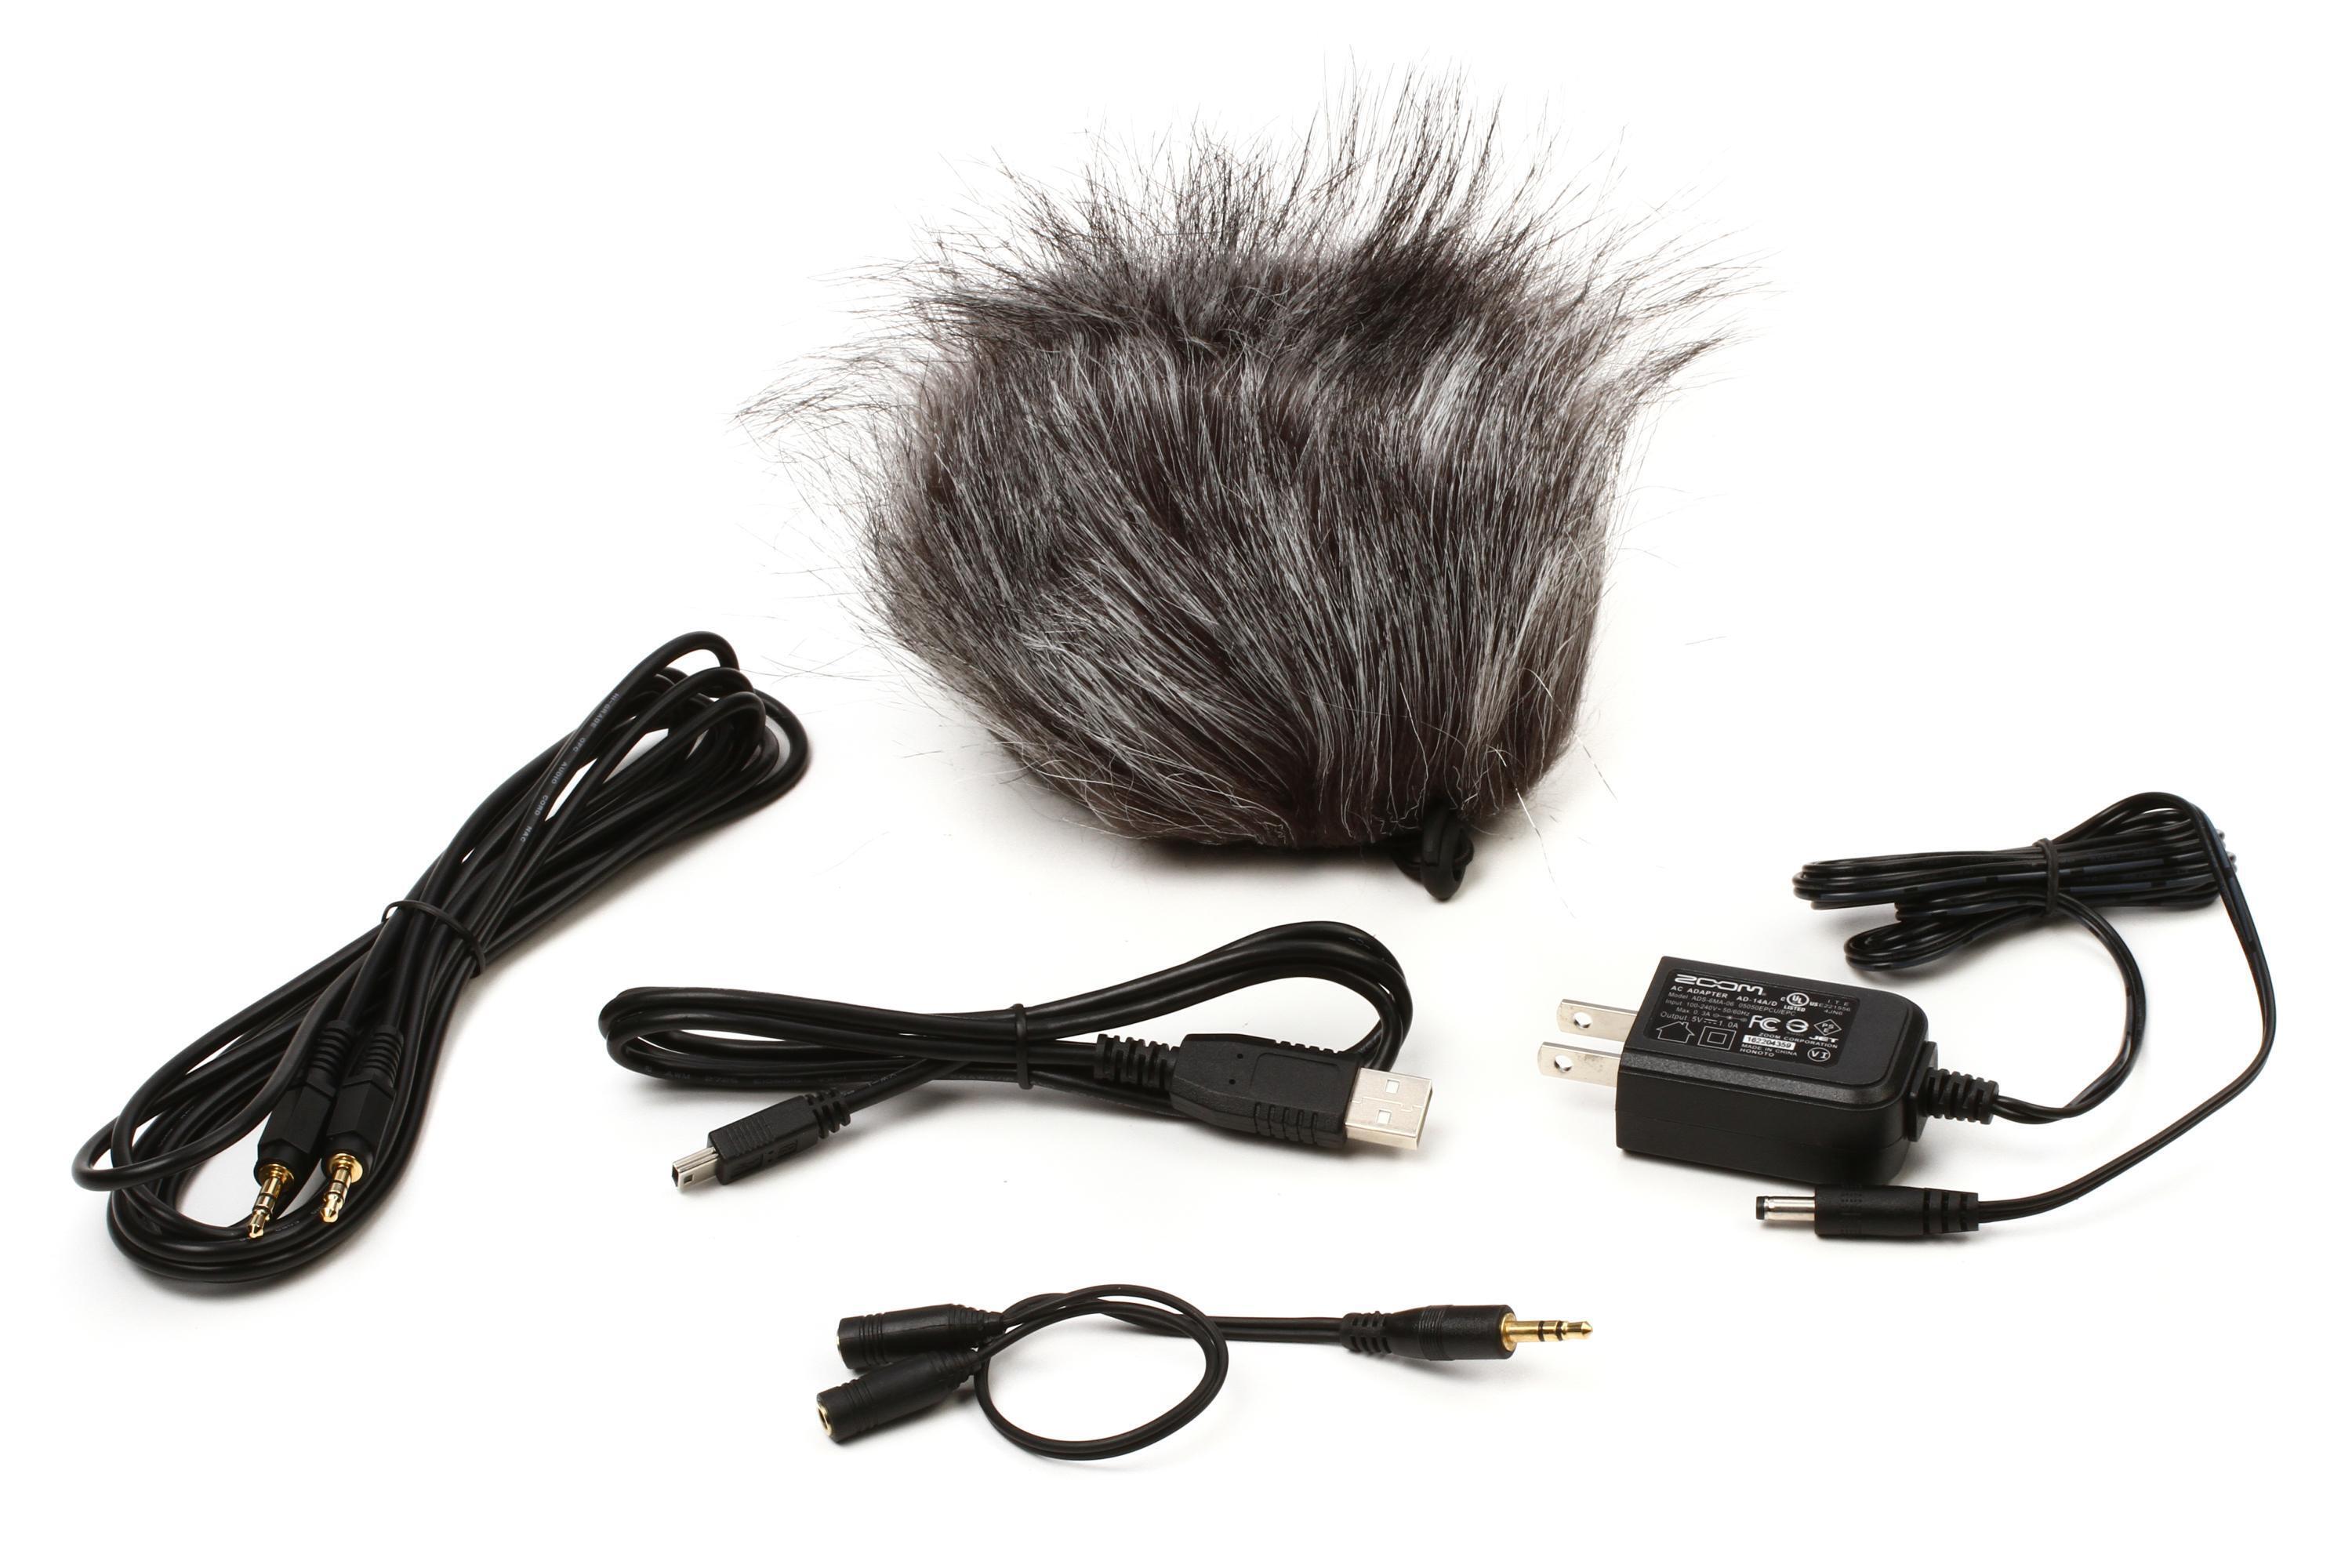 Zoom Q3HD Accessory Package | Sweetwater